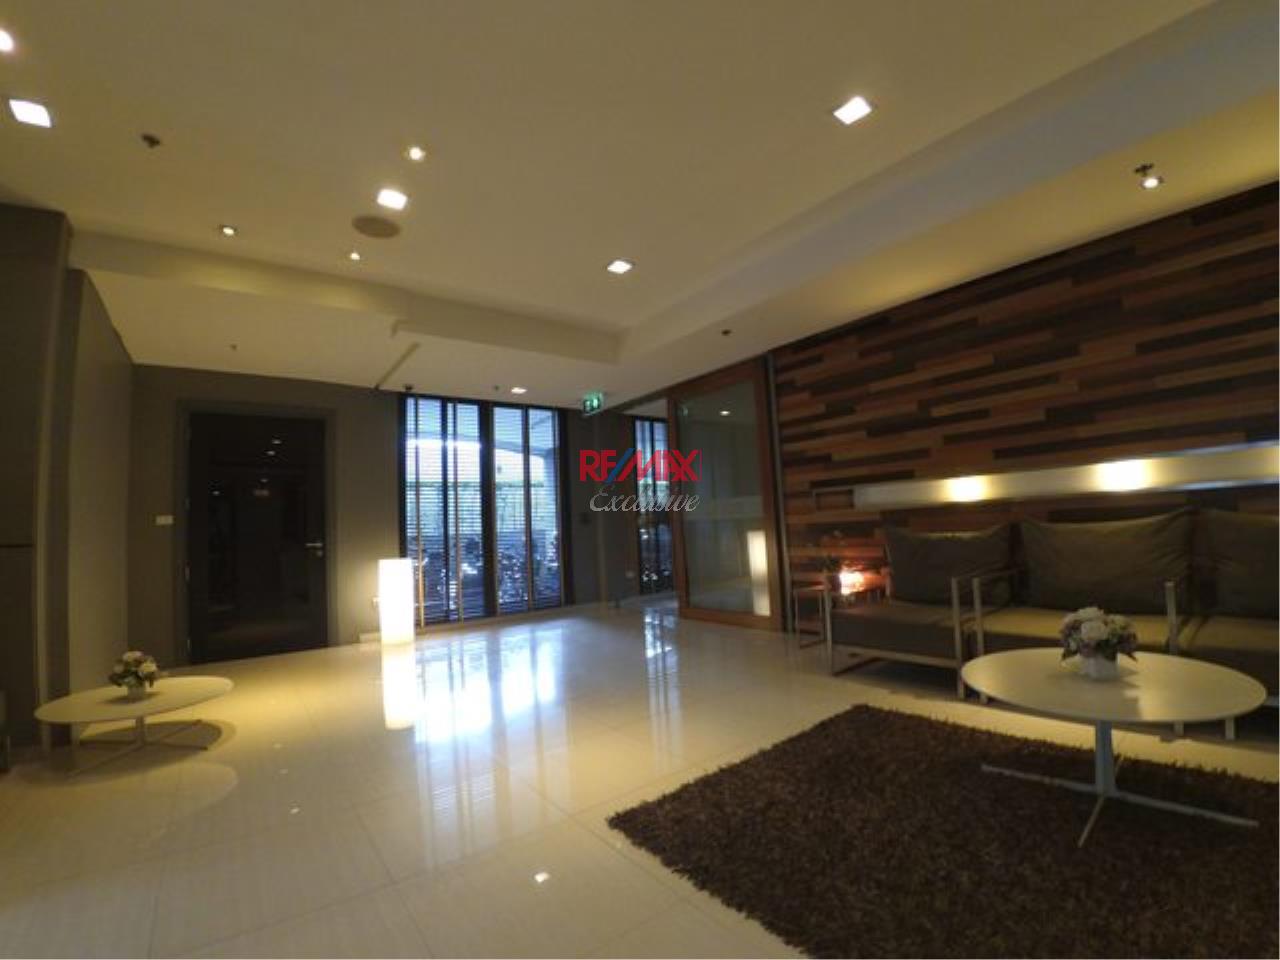 RE/MAX Exclusive Agency's THE ALCOVE, Thonglor 10, 44 Sqm., 1 Bedroom, Fully-Furnished, Fully Equipped Kitchen For RENT !!!! 6